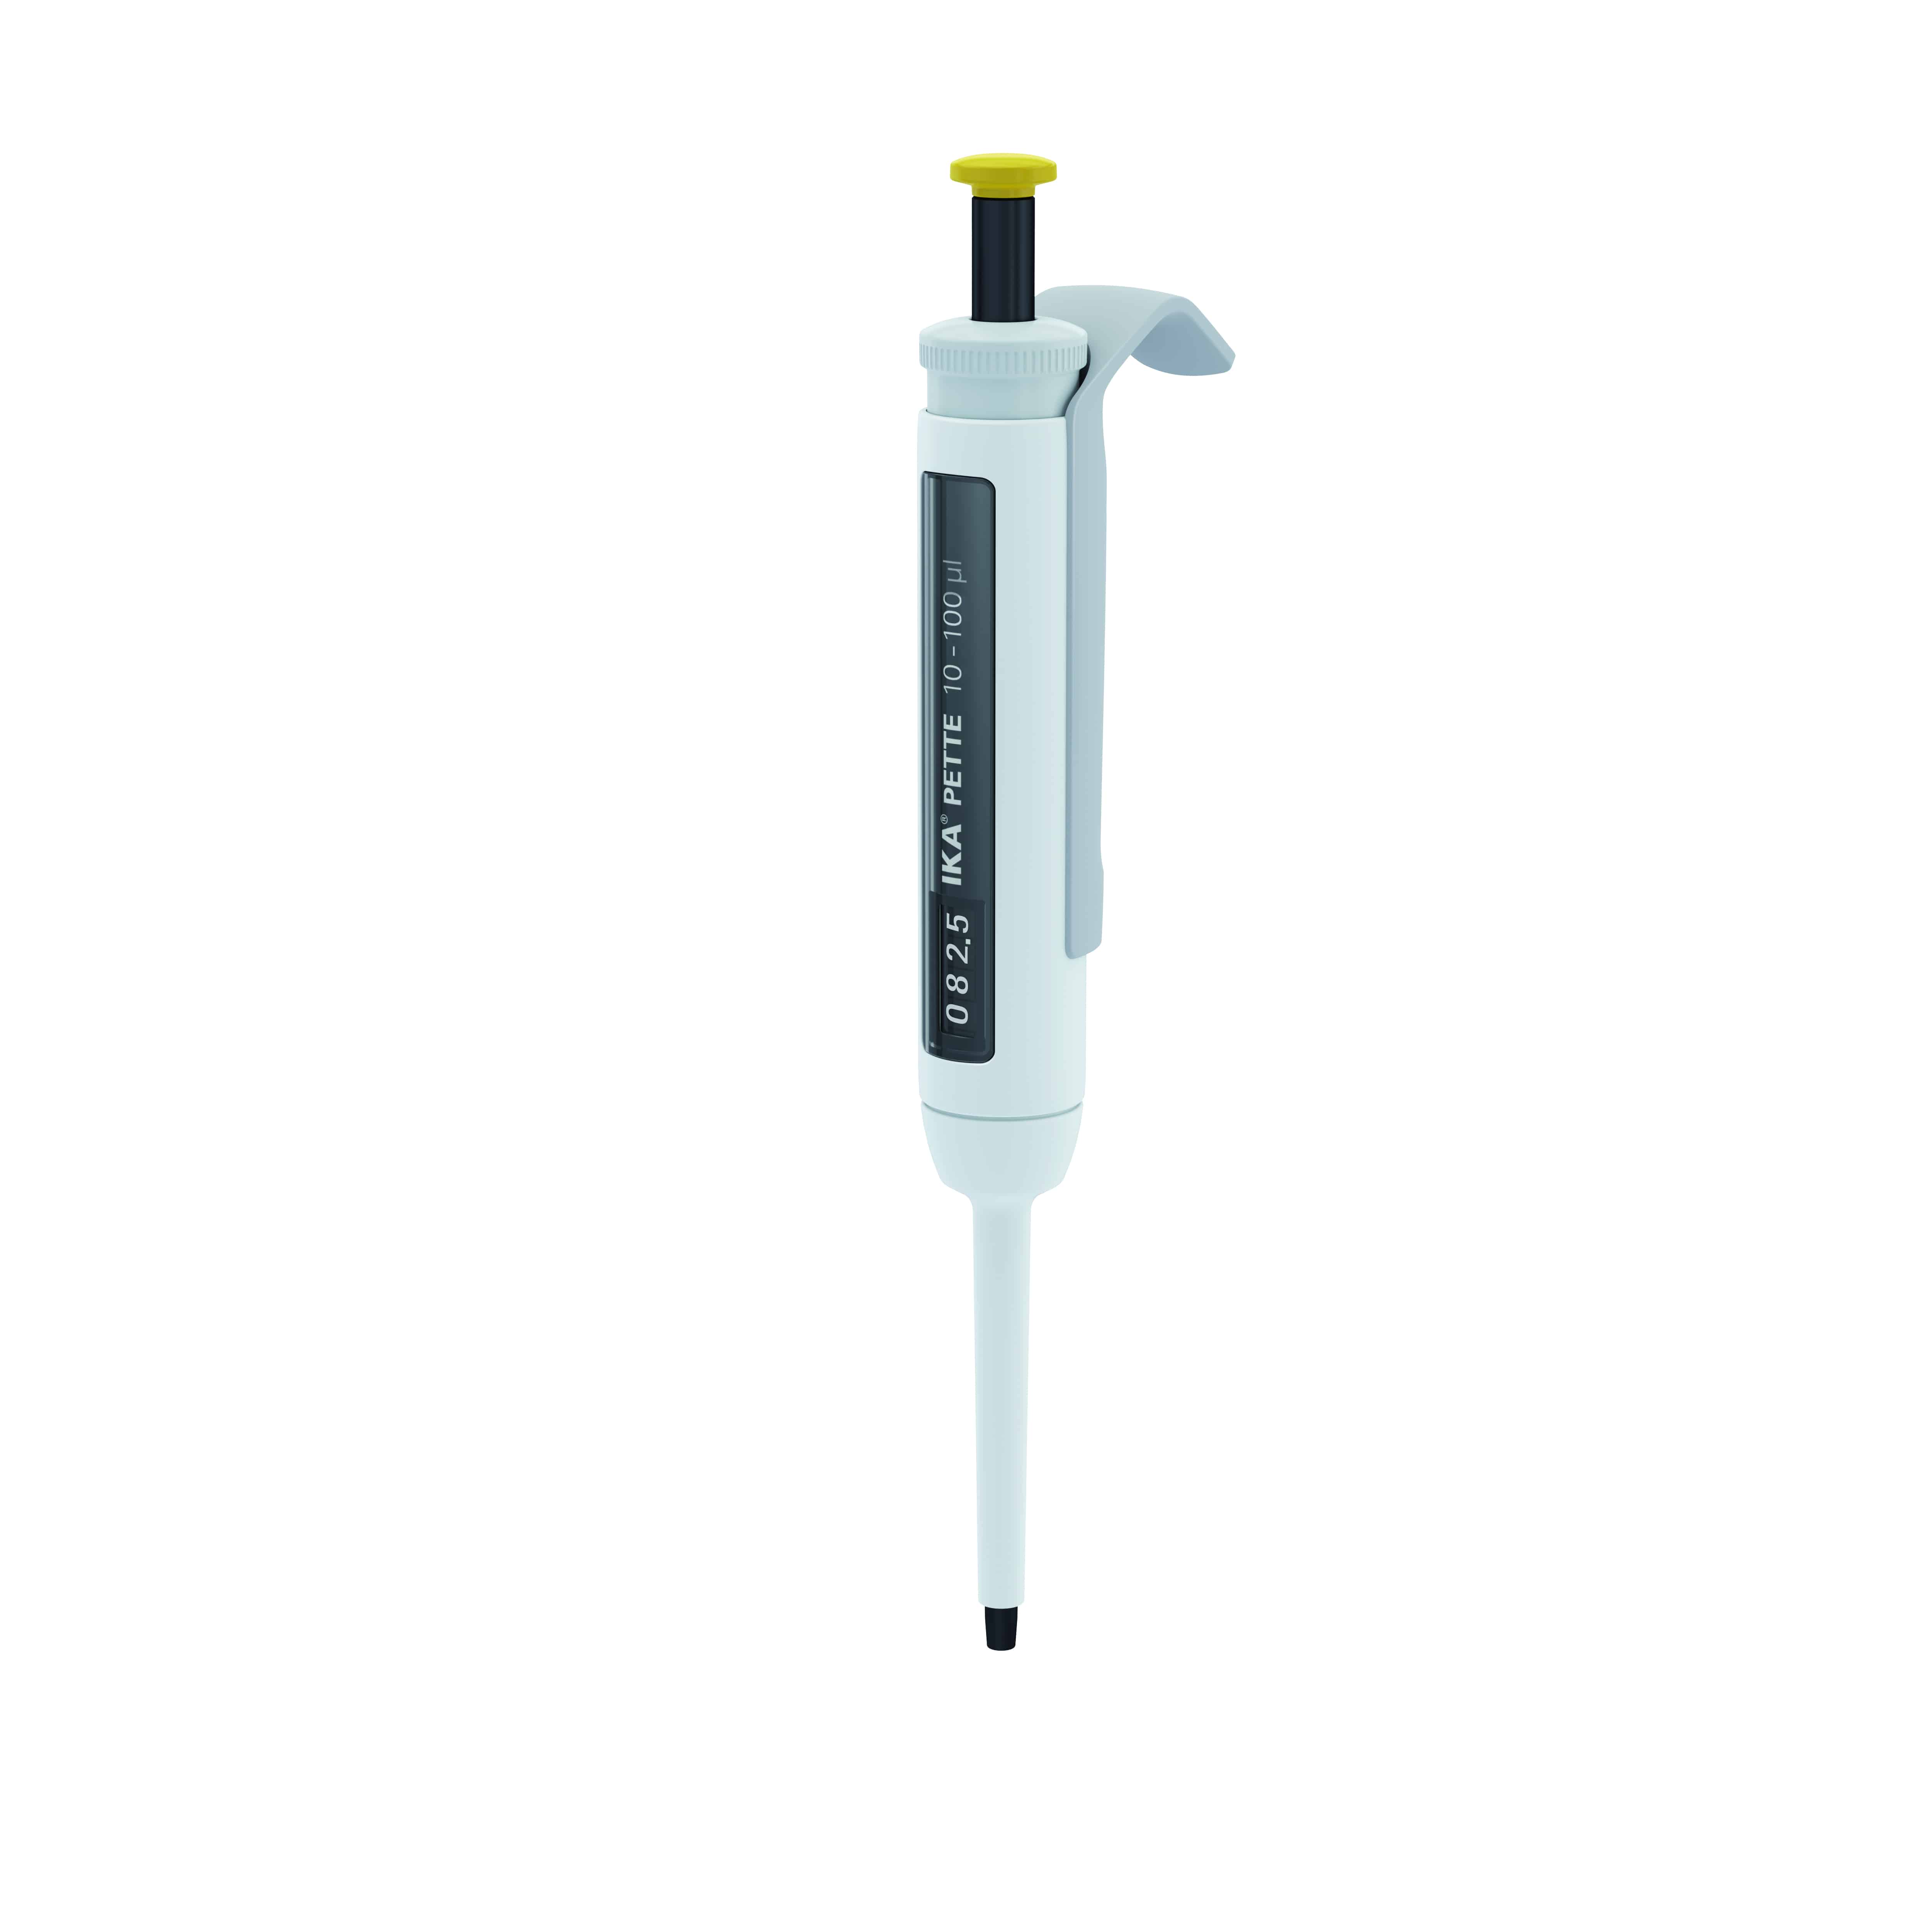 Pipette of the IKA Group made of polypropylene